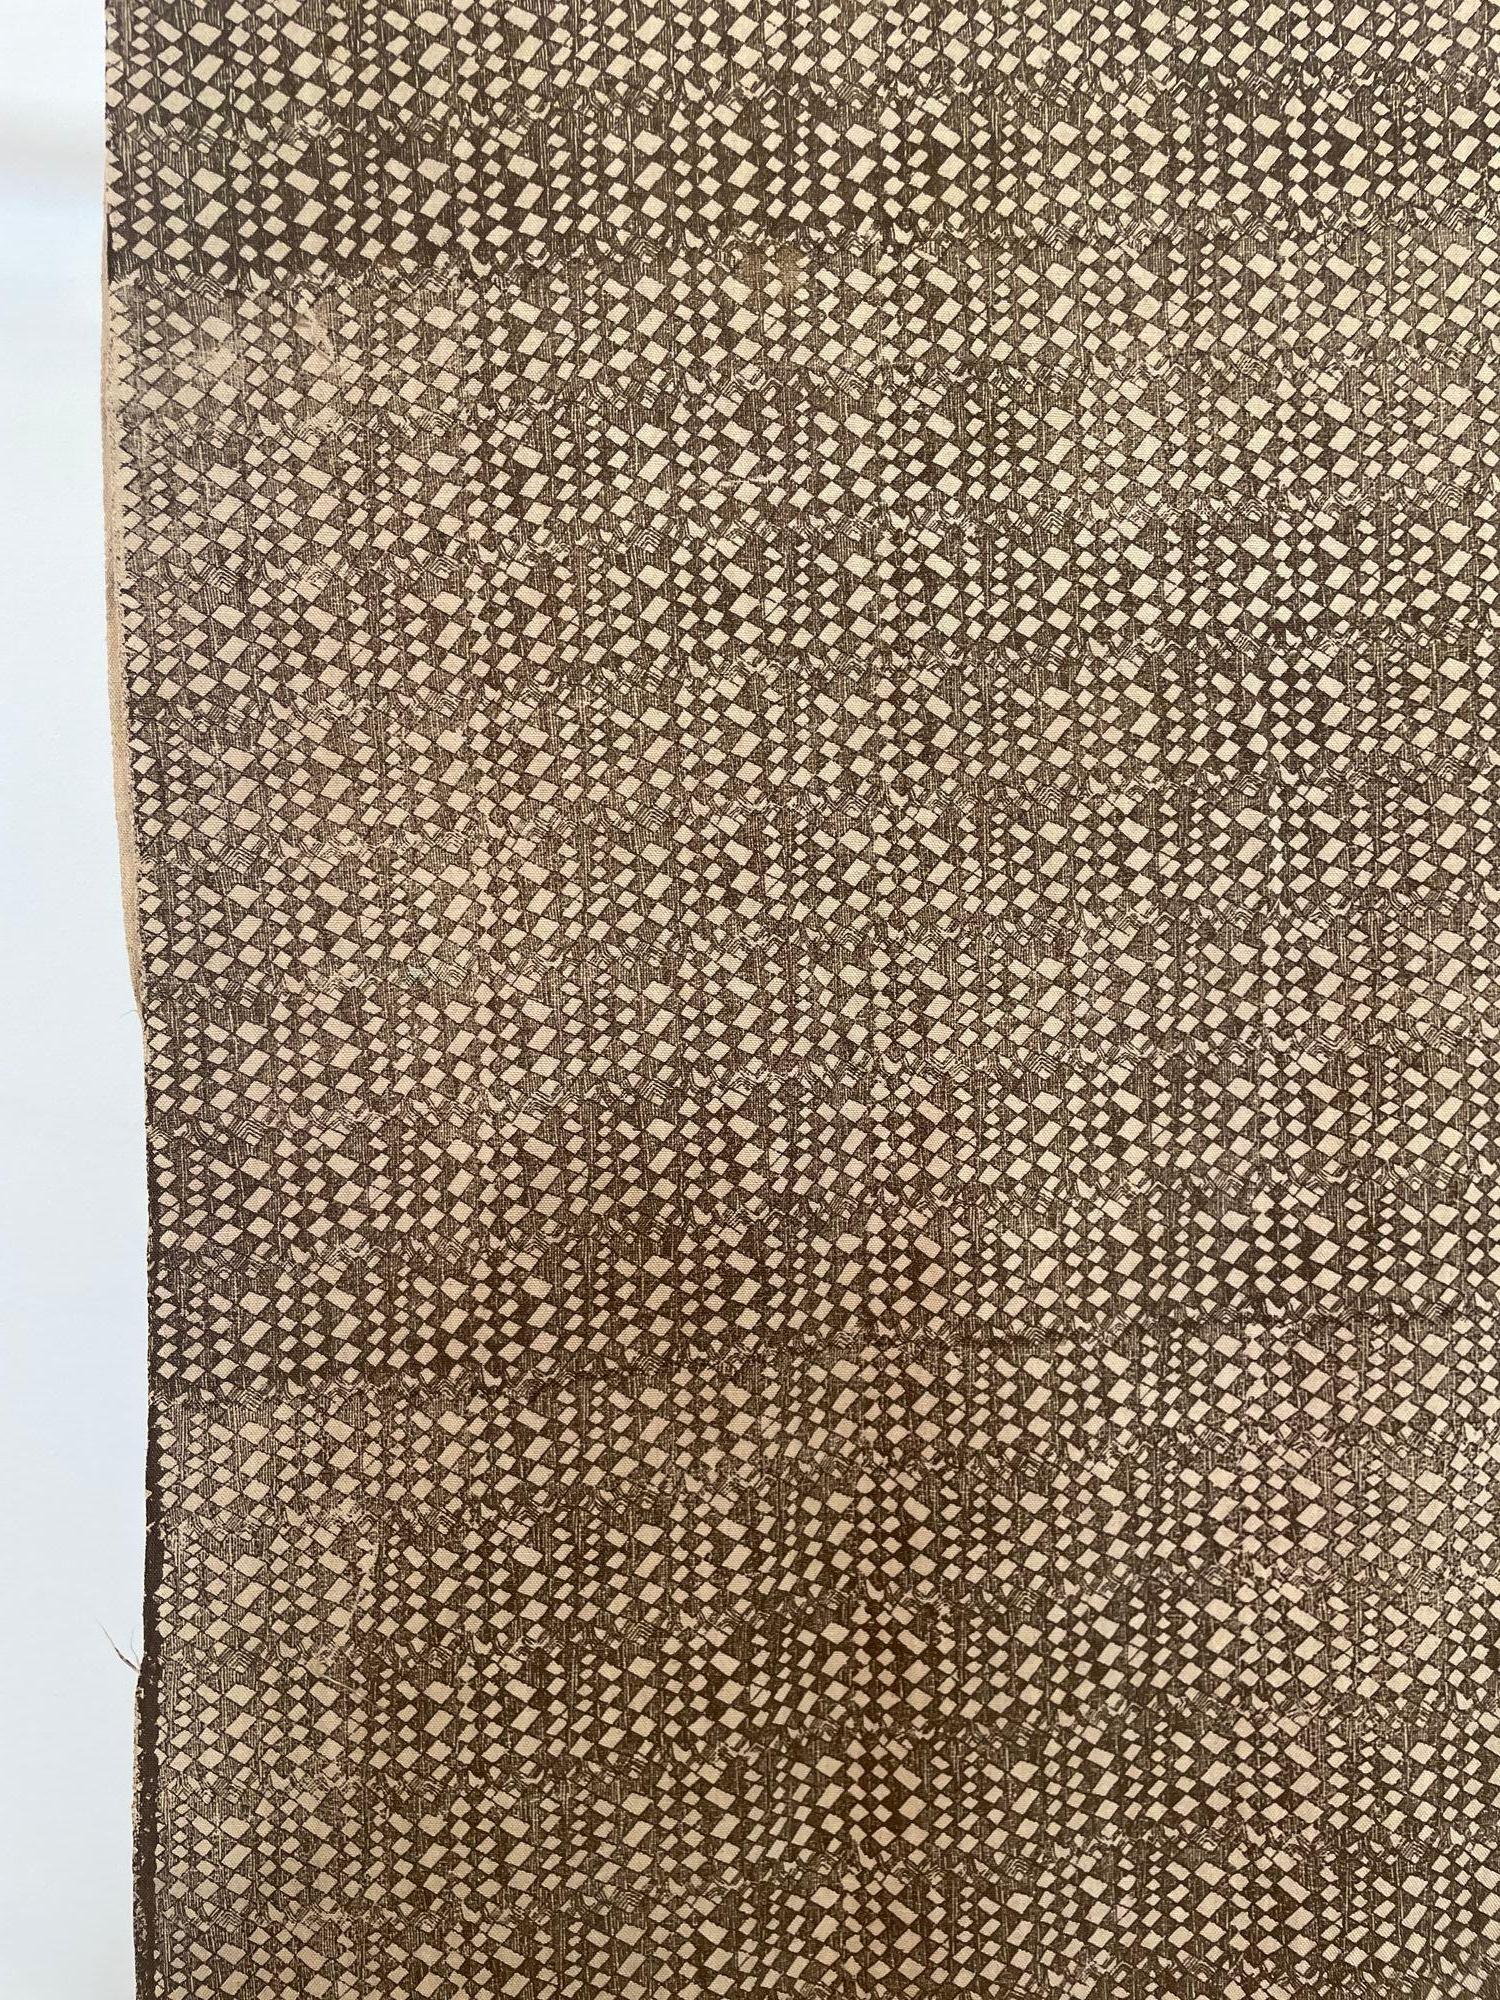 African Batik Cloth Natural Hand-woven Hand-Printed Cotton Fabric Ghana 10 yards.
Colors are organic earth tone beige and light brown in geometric design.
Non waxed fabric circa 1950s.
Hand made in Ghana Africa.
Museum Quality Original Long